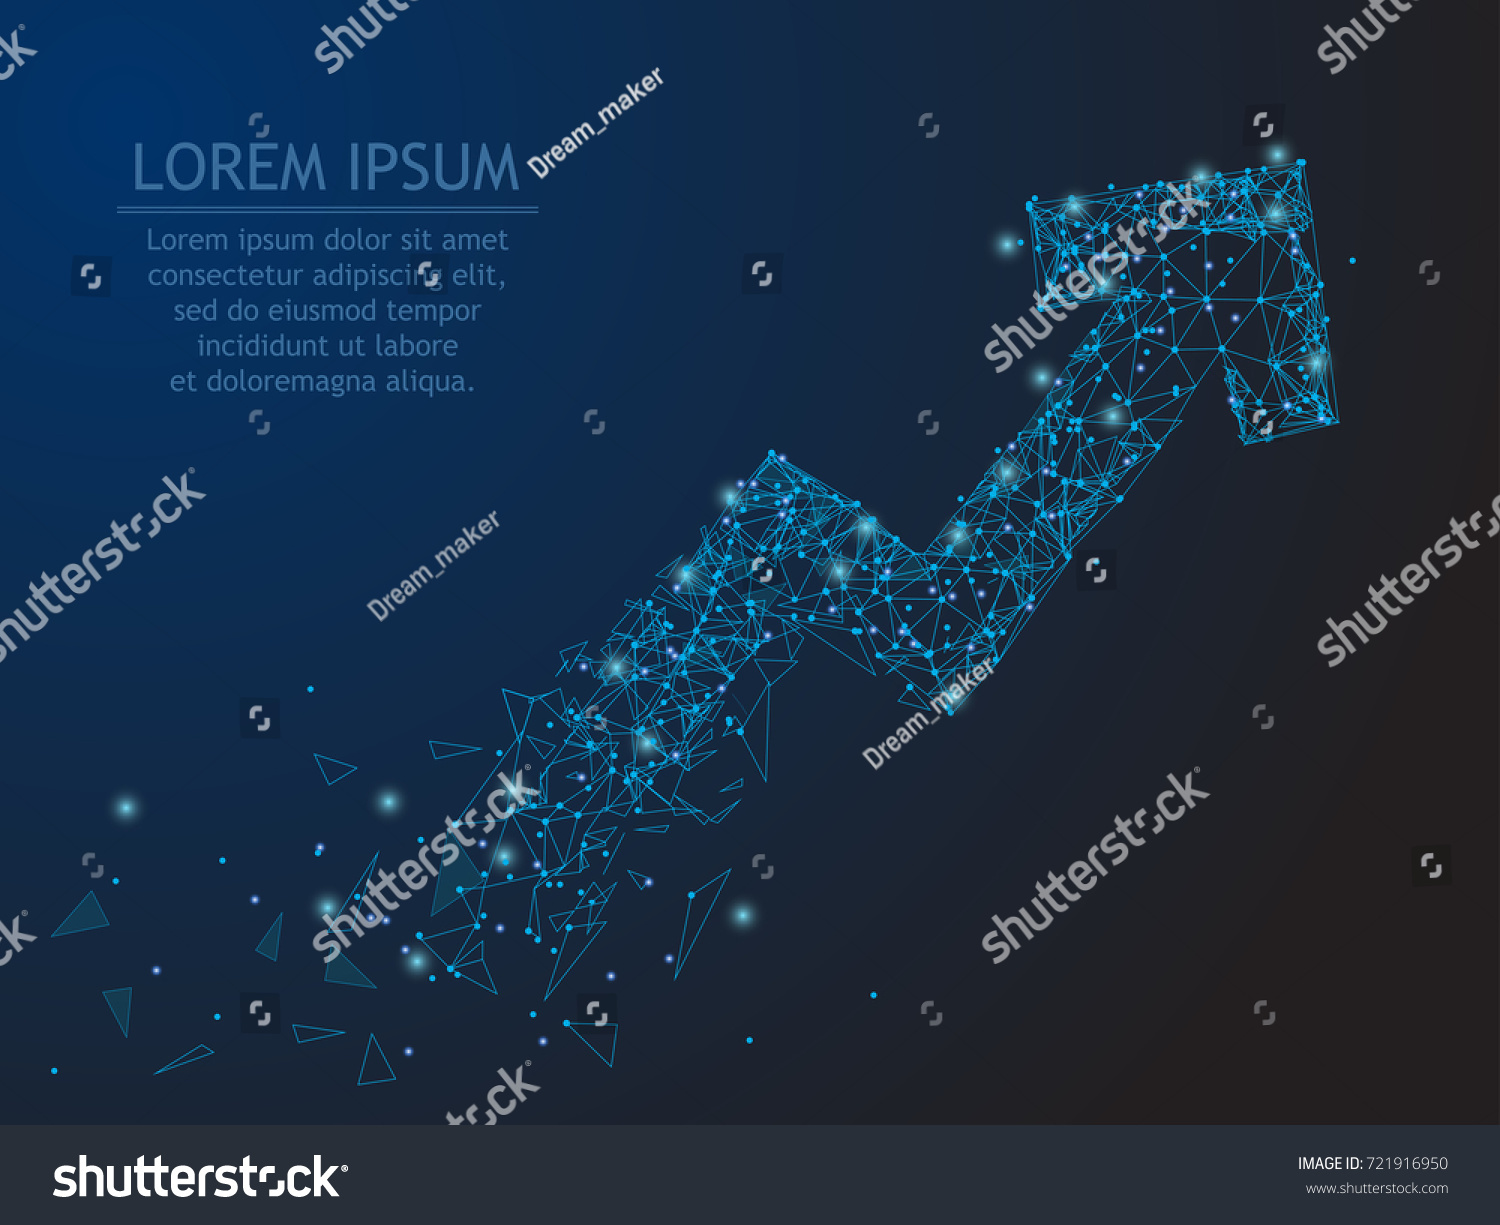 SVG of Polygonal wire frame low poly mash looks like constellation arrow growth with crumbled end on blue night sky. Business, finance, career or other grows concept illustration or background svg